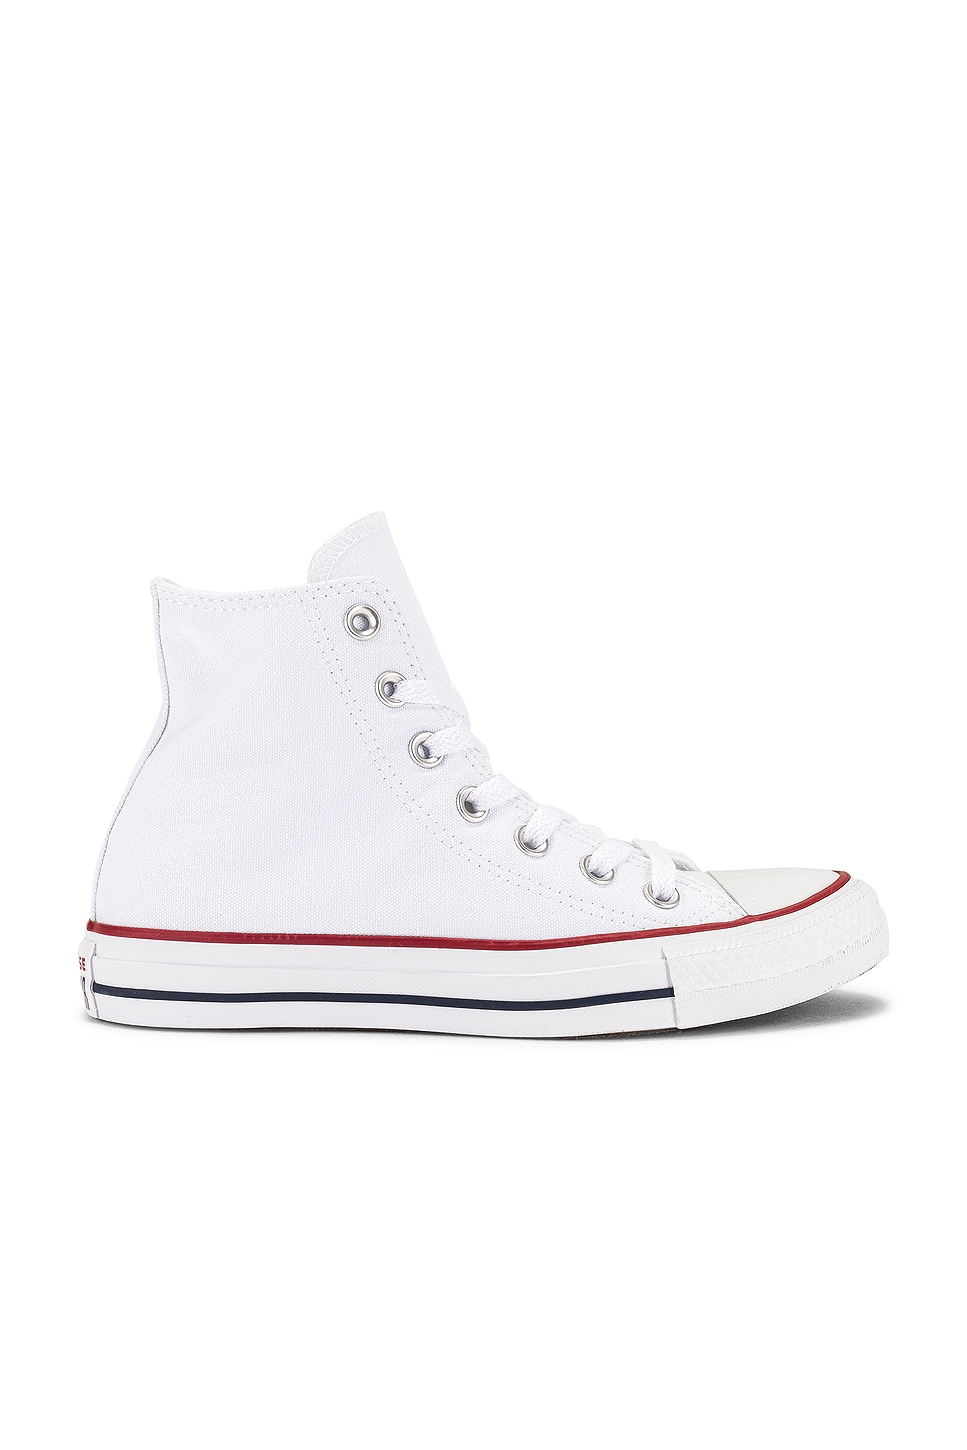 Image 1 of Converse Chuck Taylor All Star Hi Sneaker in Optical White